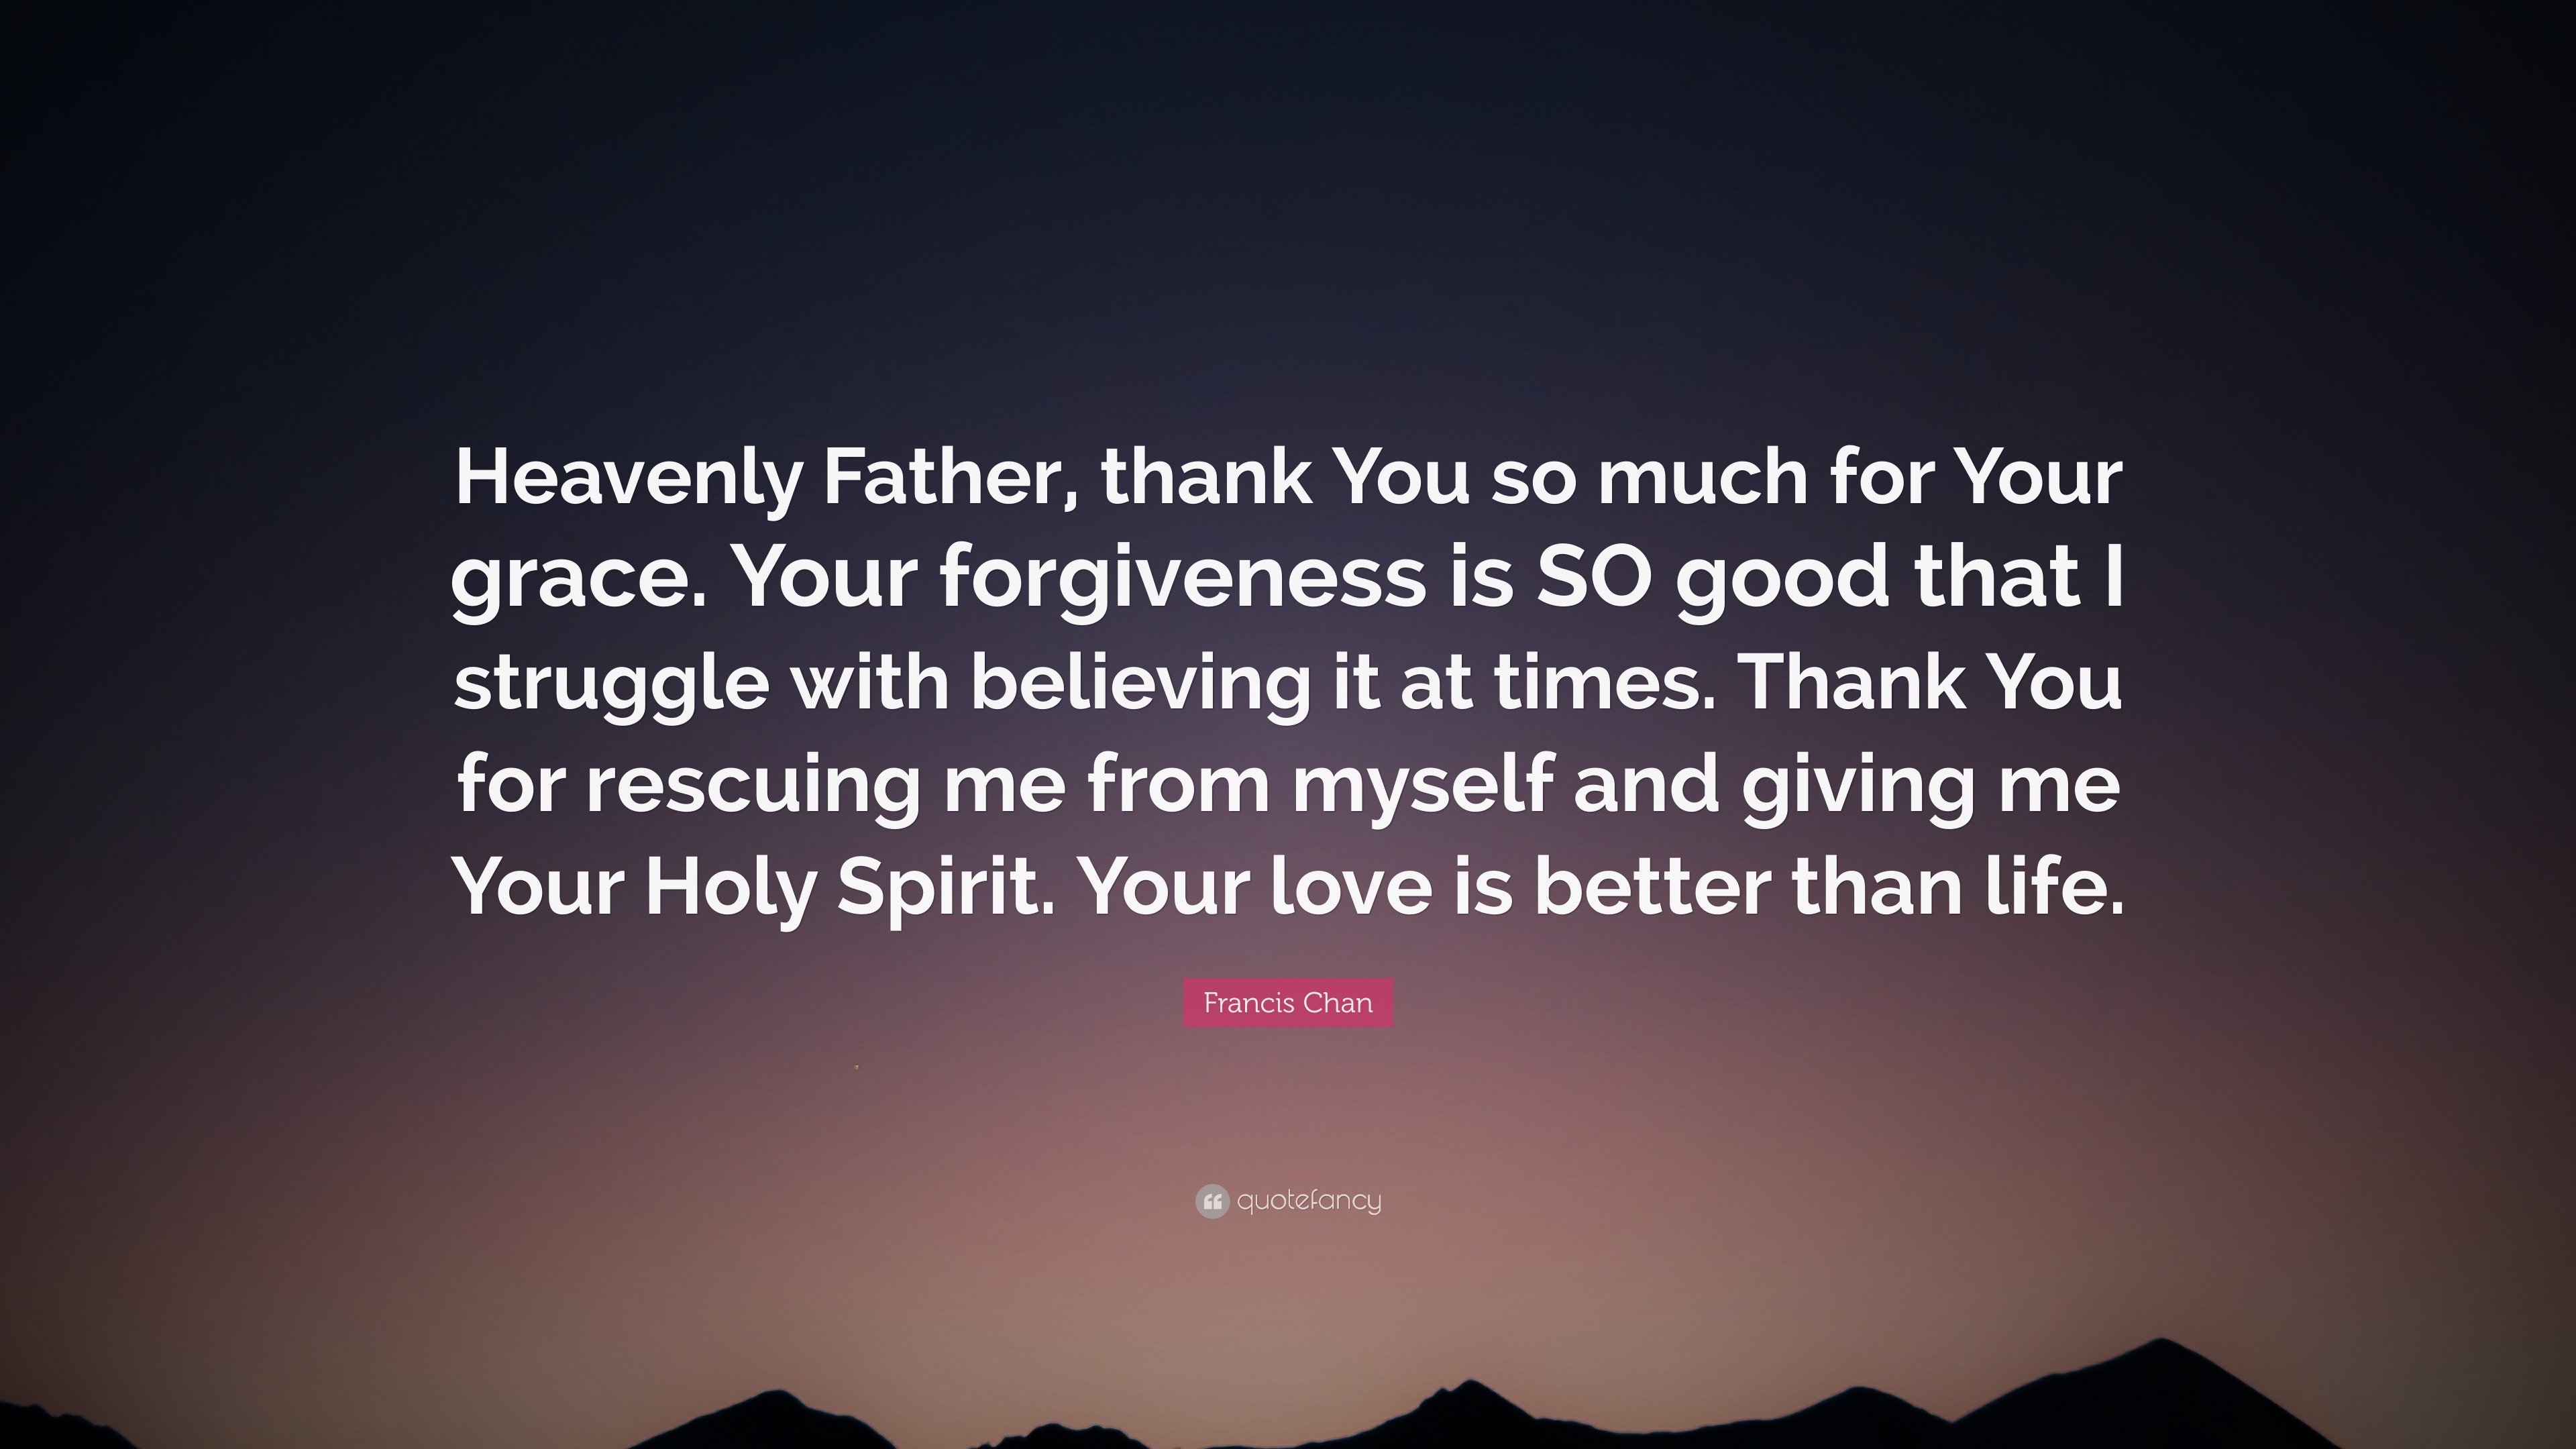 Francis Chan Quote: “Heavenly Father, thank You so much for Your grace ...